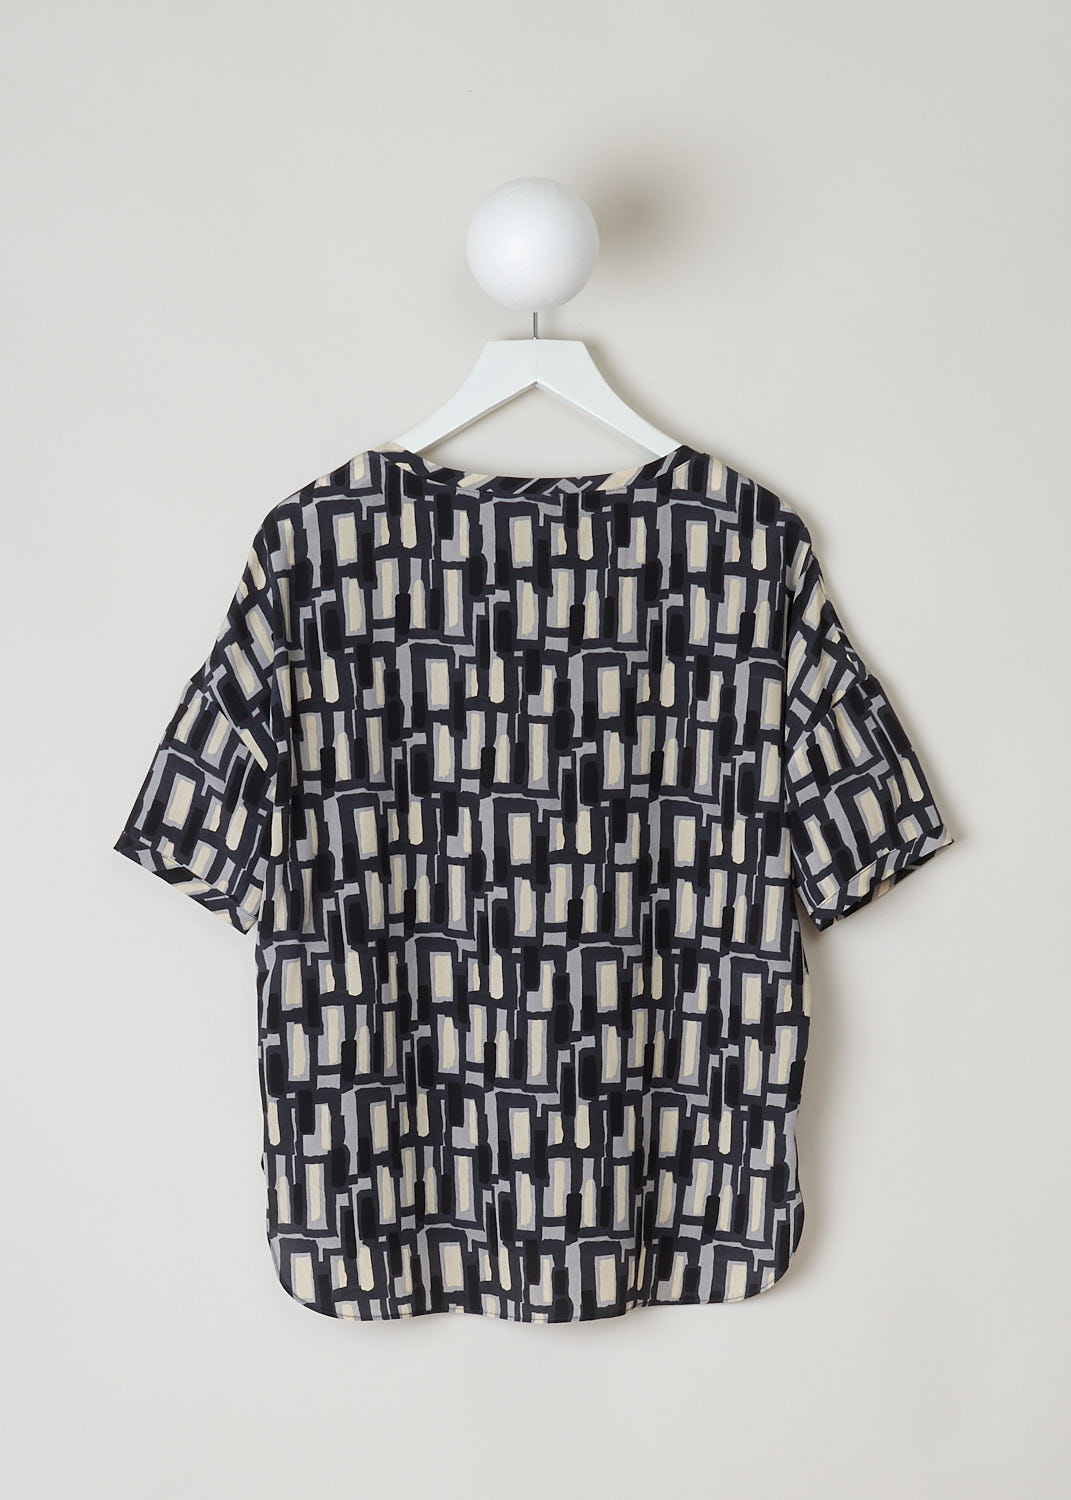 ASPESI, SILK PRINTED TOP, 5618_V126_66173, Print, Back, This short sleeve top has a geometric print in black, grey and off-white hues. The top features a rounded neckline, an asymmetric finish with small slits on the sides and a rounded hemline.
